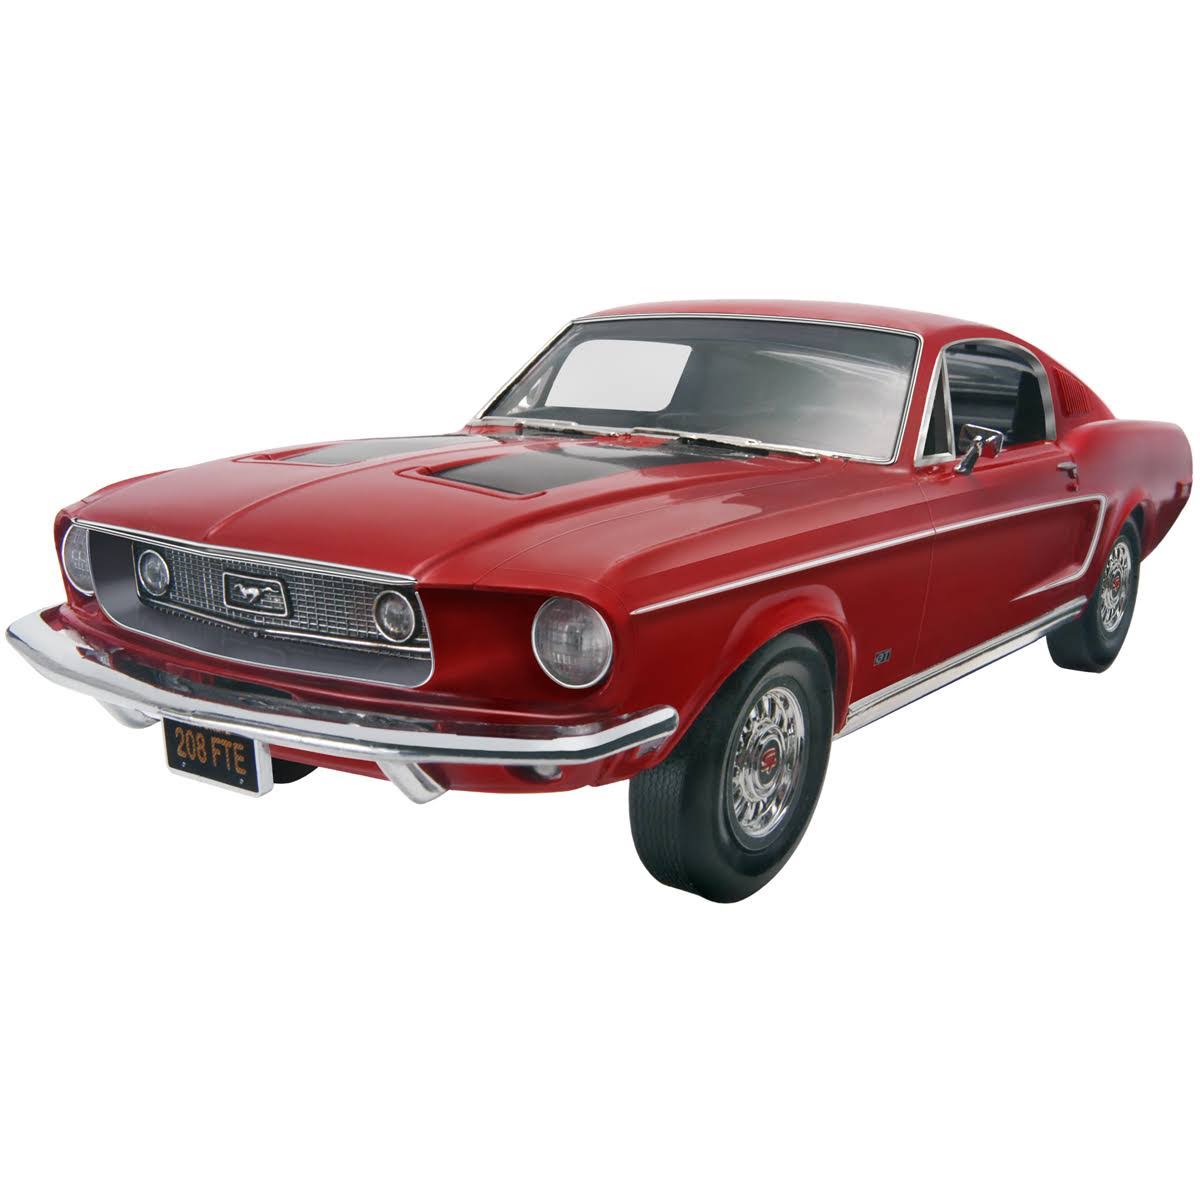 1968 Mustang Gt 1/25 Scale Plastic Glue and Paint Model Car Kit